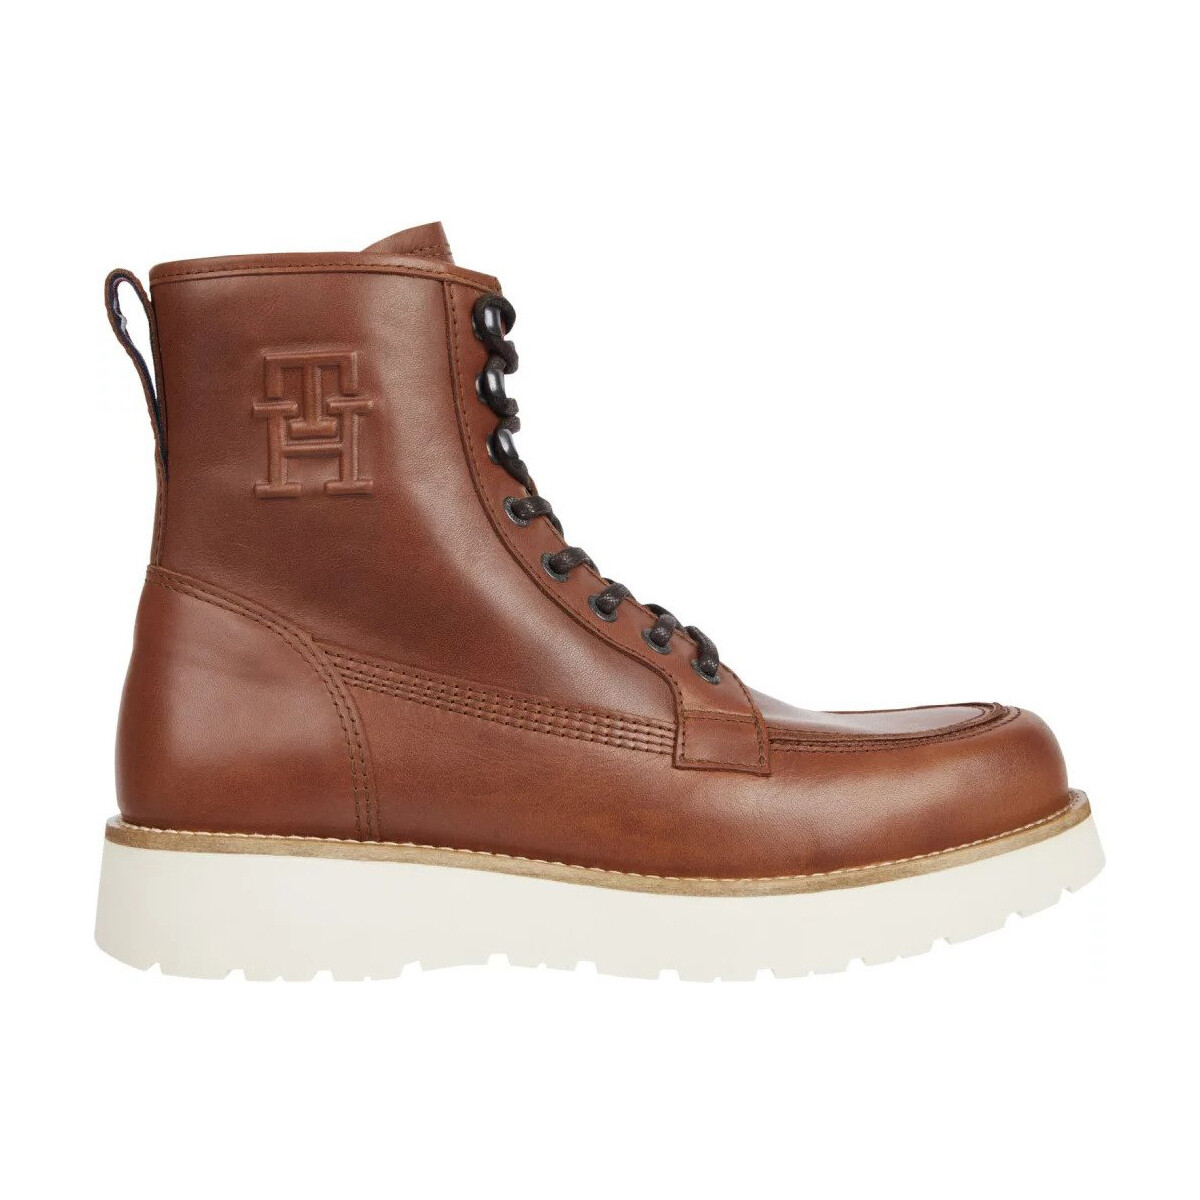 Zapatos Mujer Low boots Tommy Hilfiger Veterlaars Warme Voering Marrón